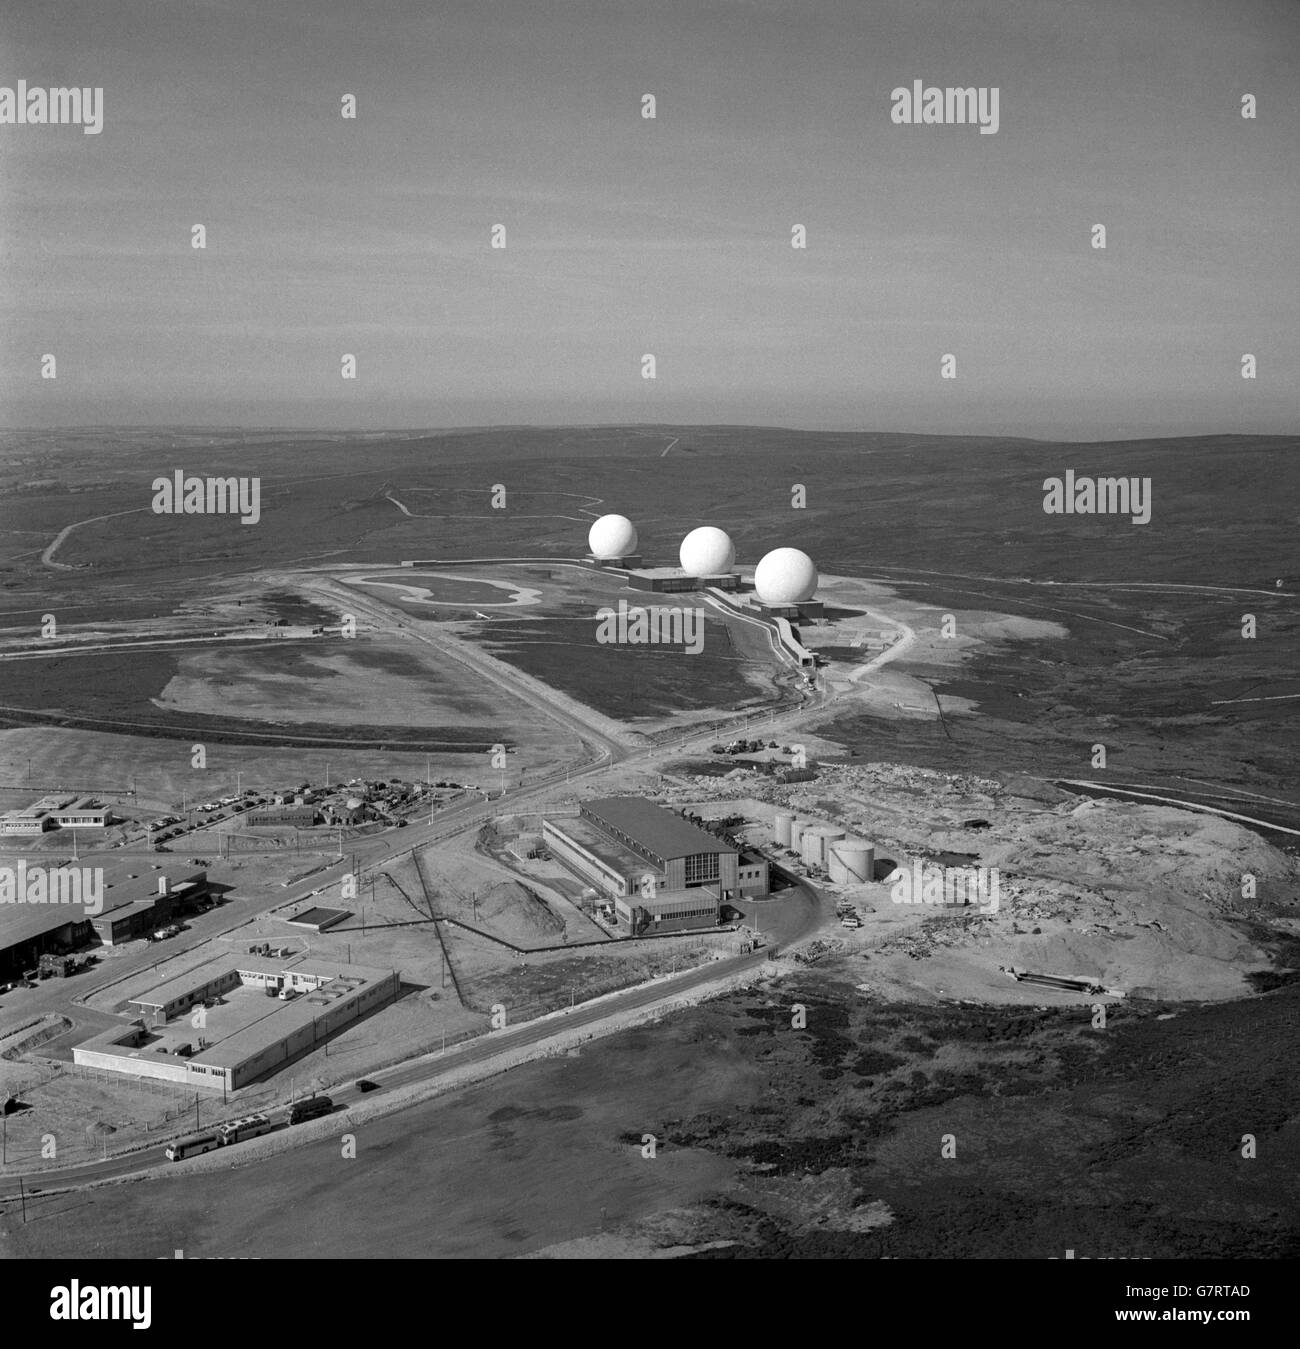 Militare - Fylingdales - missile balistico Early Warning System Station - RAF - Fylingdales Mori, Nord Yorskhire Foto Stock